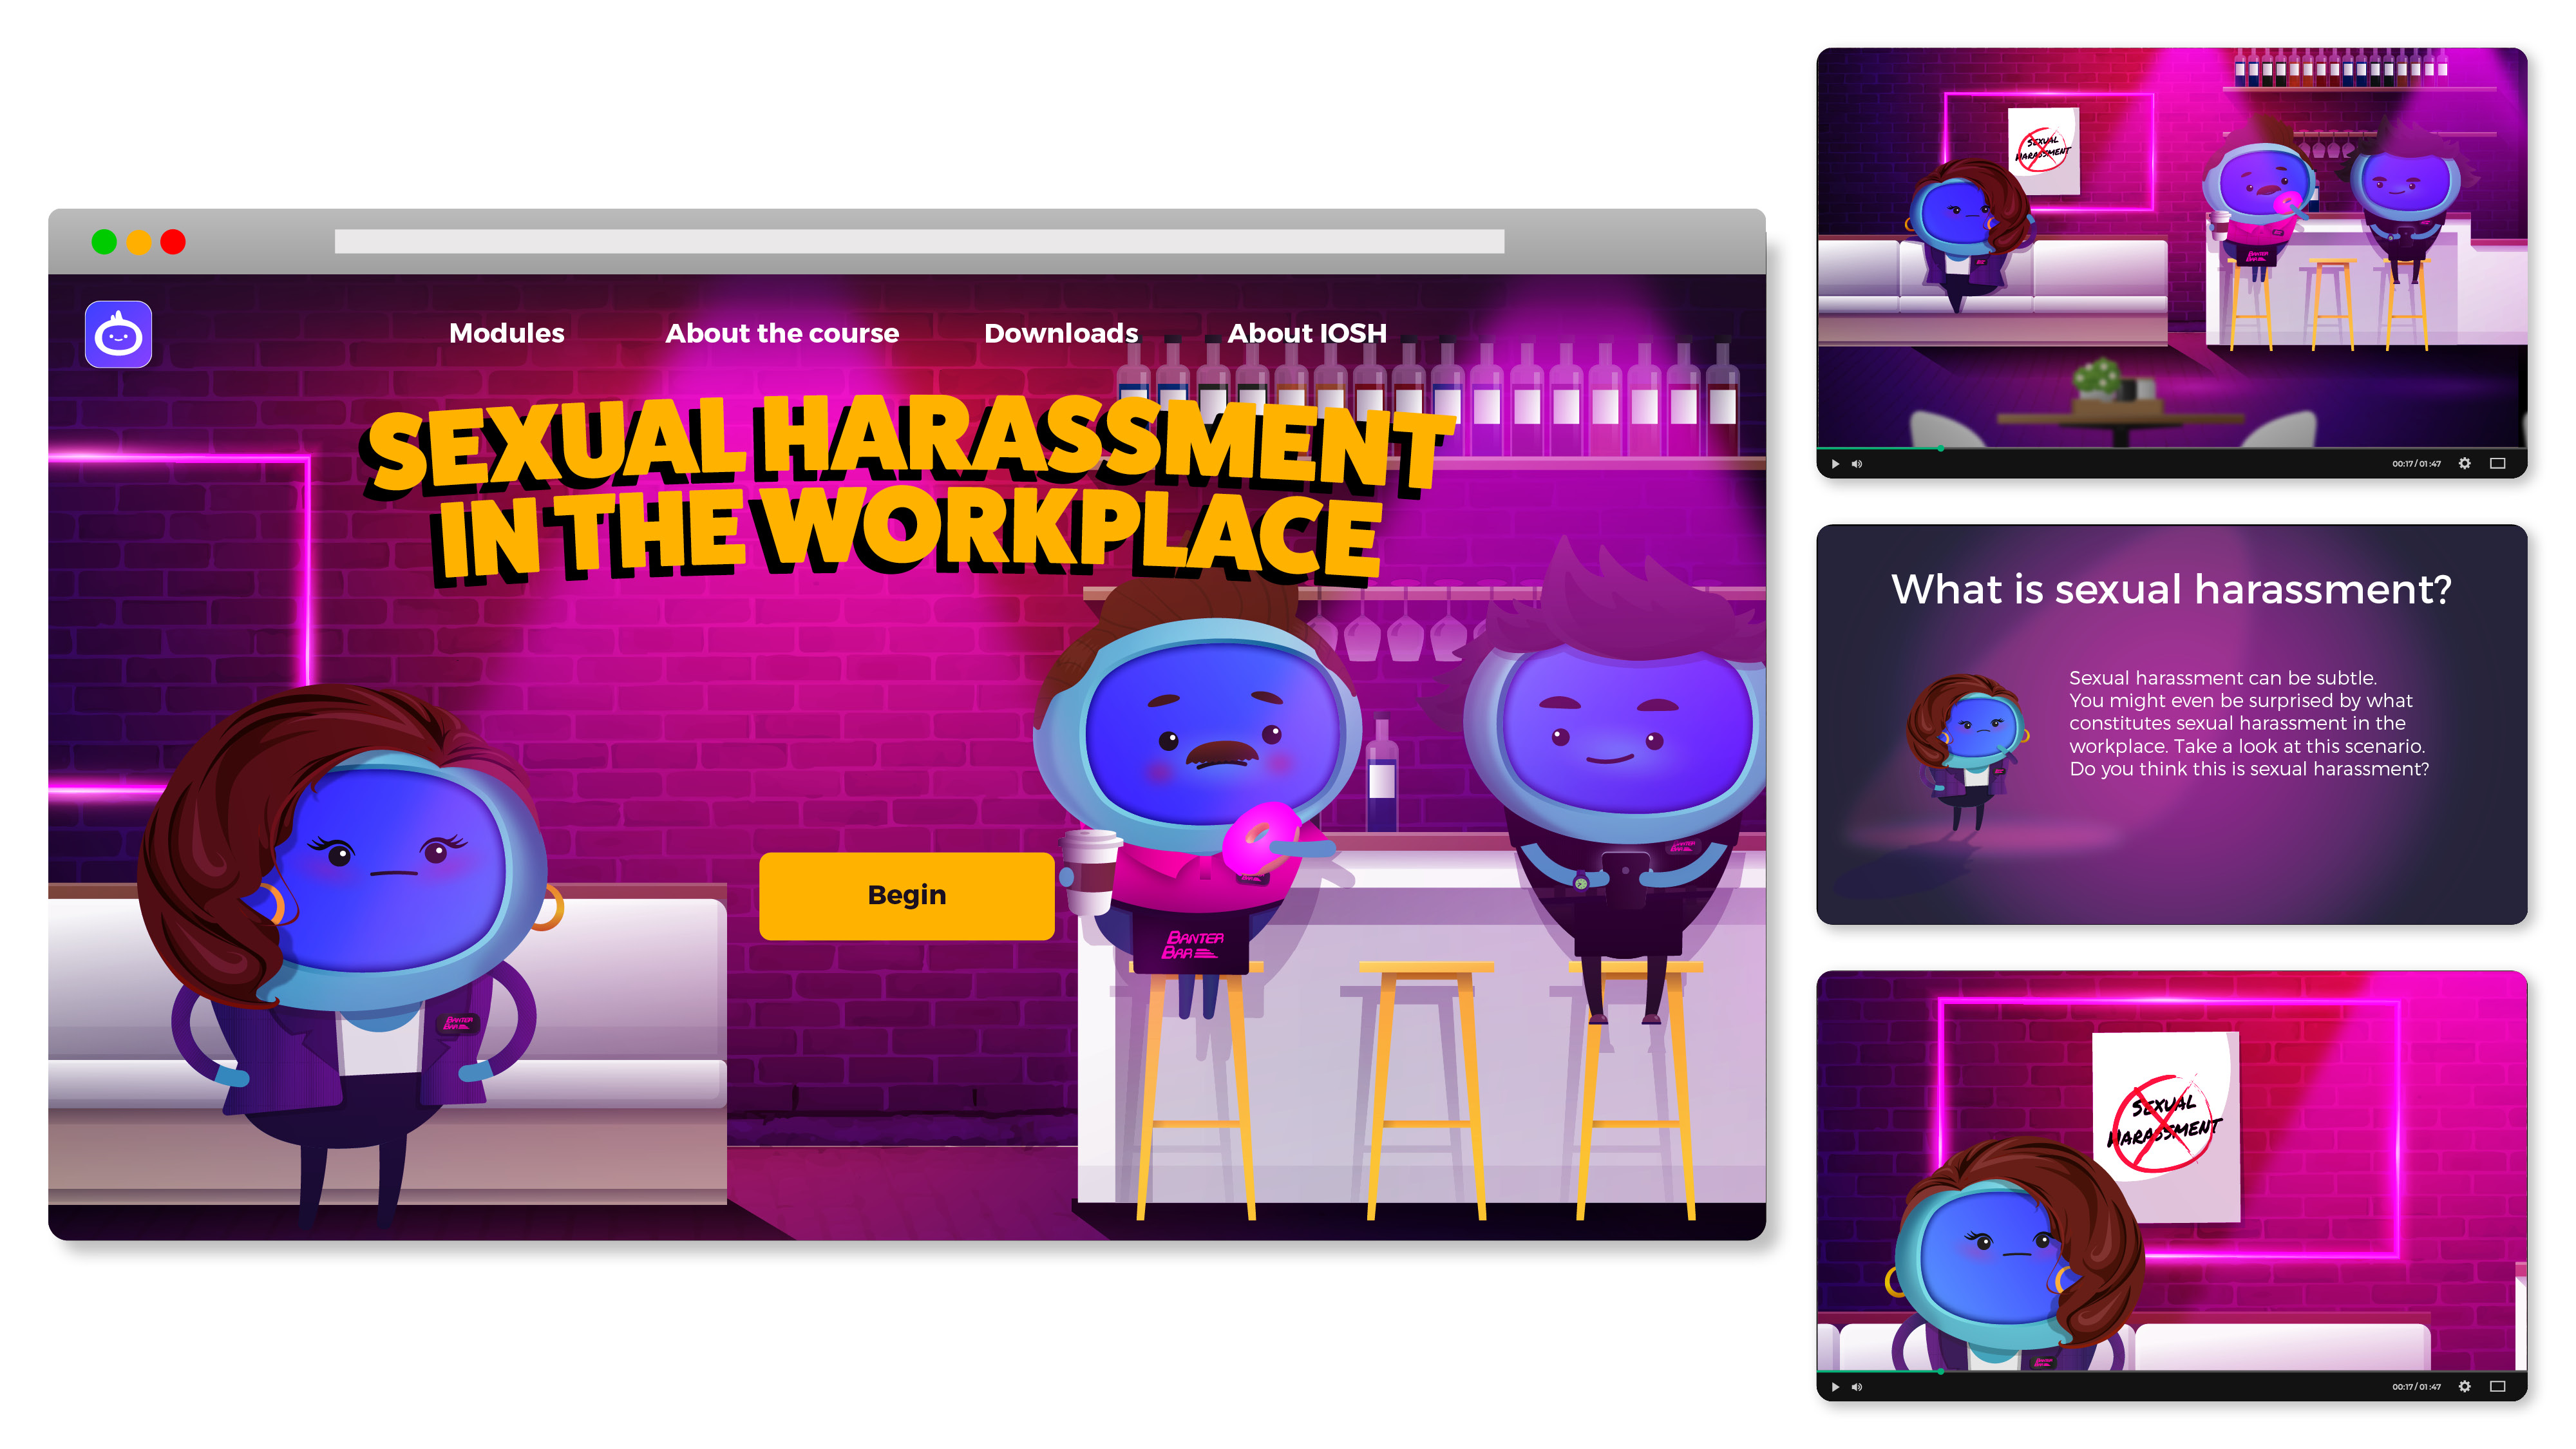 iAM 00150 - Sexual Harassment in the workplace - Landing Page